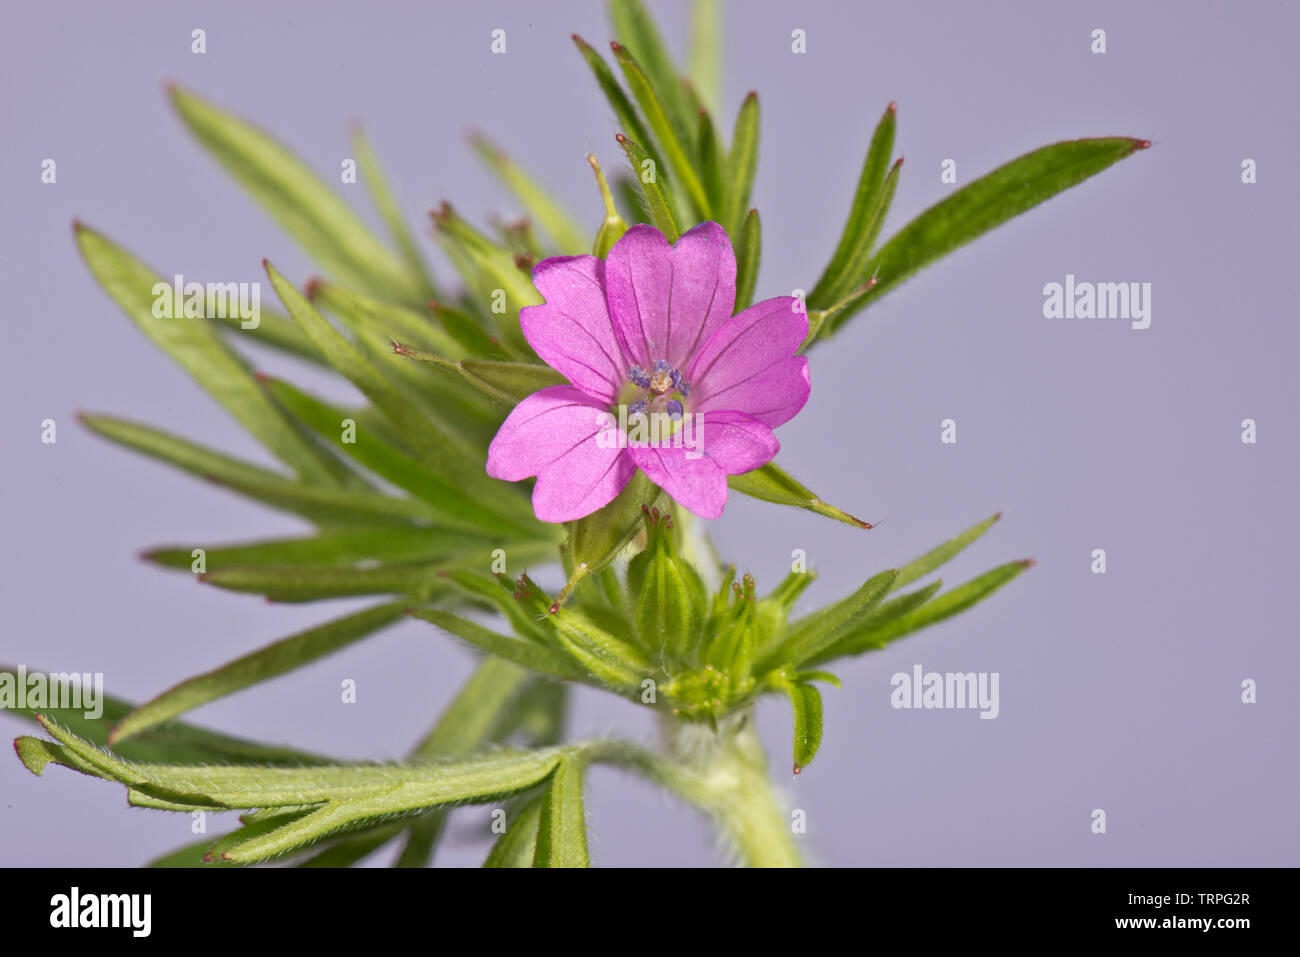 Cut-leaved geranium, Geranium dissectum, small pink flowers and deeply dissected leaves of annual weed, Berkshire, May Stock Photo